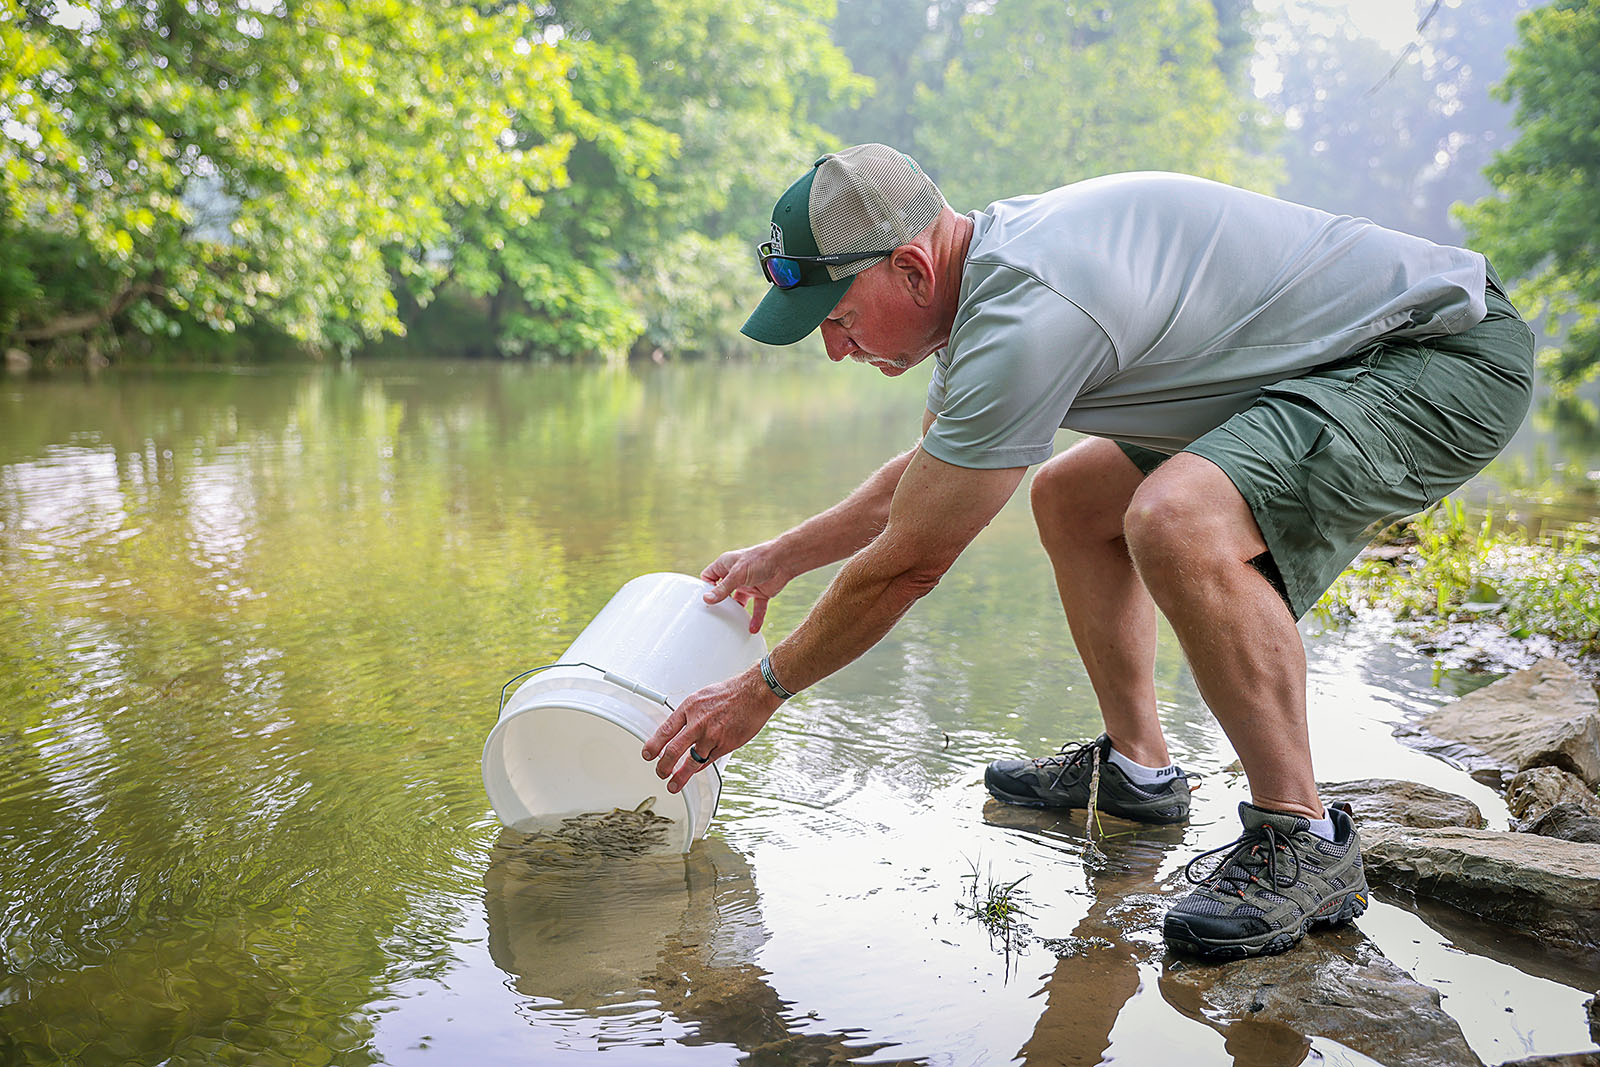 An image of a man using a small bucket to deliver smallmouth bass into a river